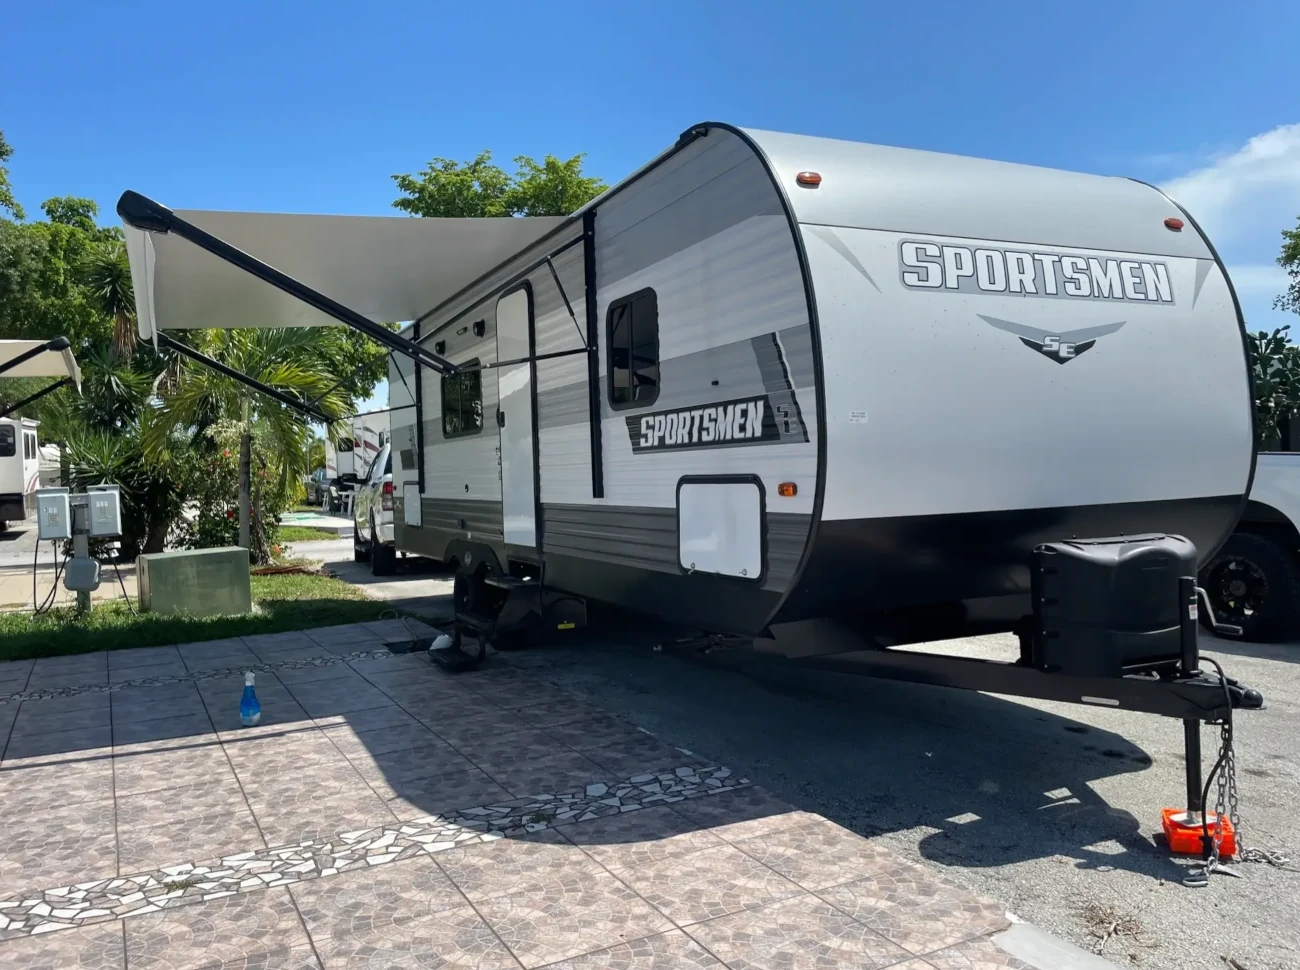 campers for rent key west